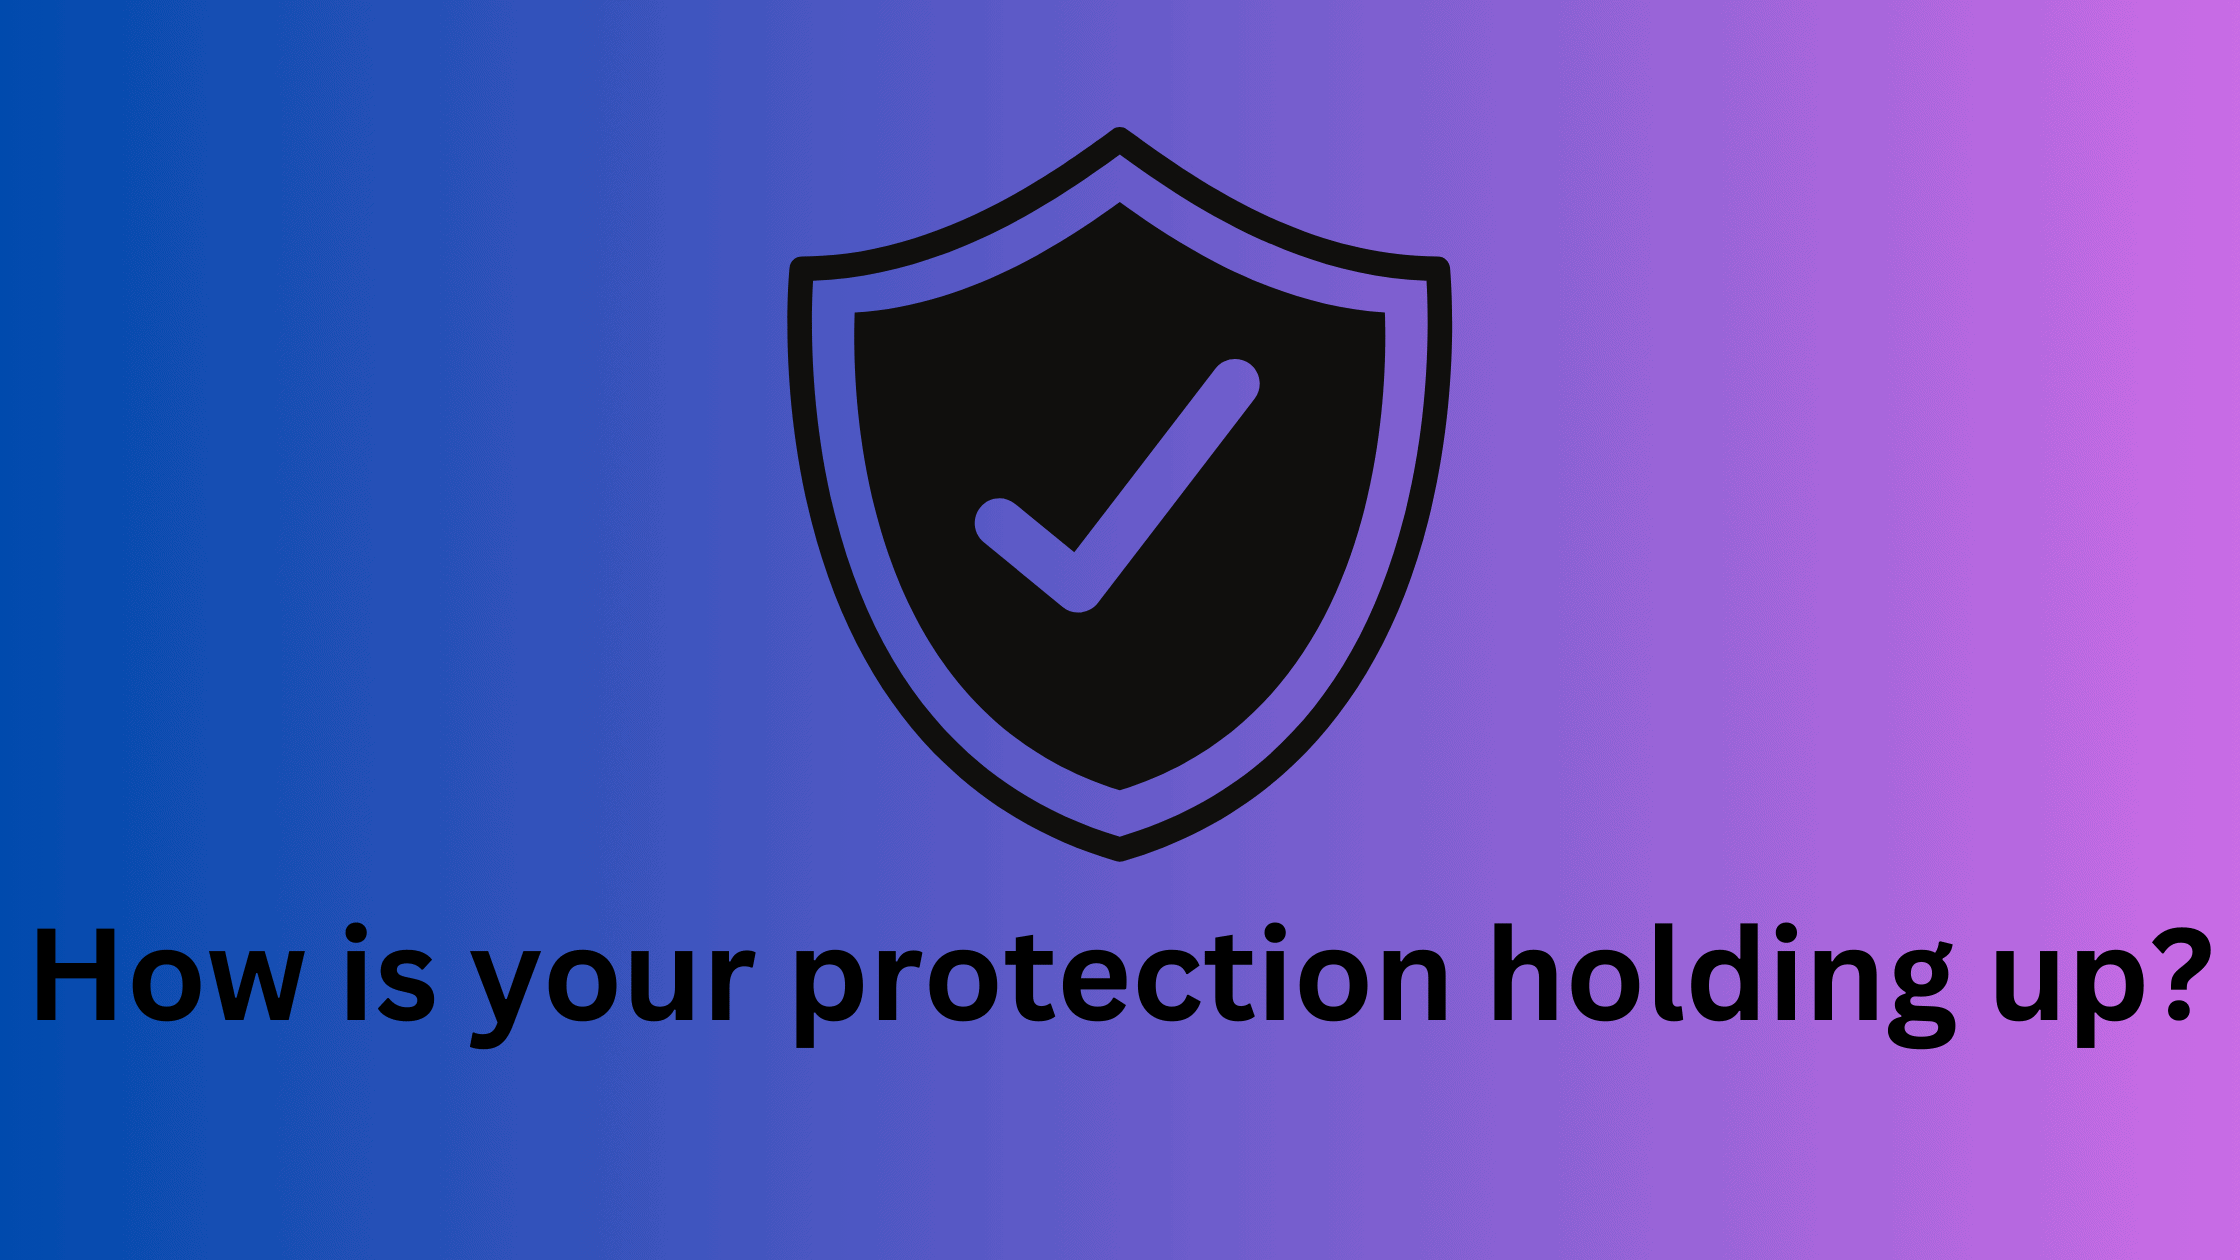 How is your protection holding up?